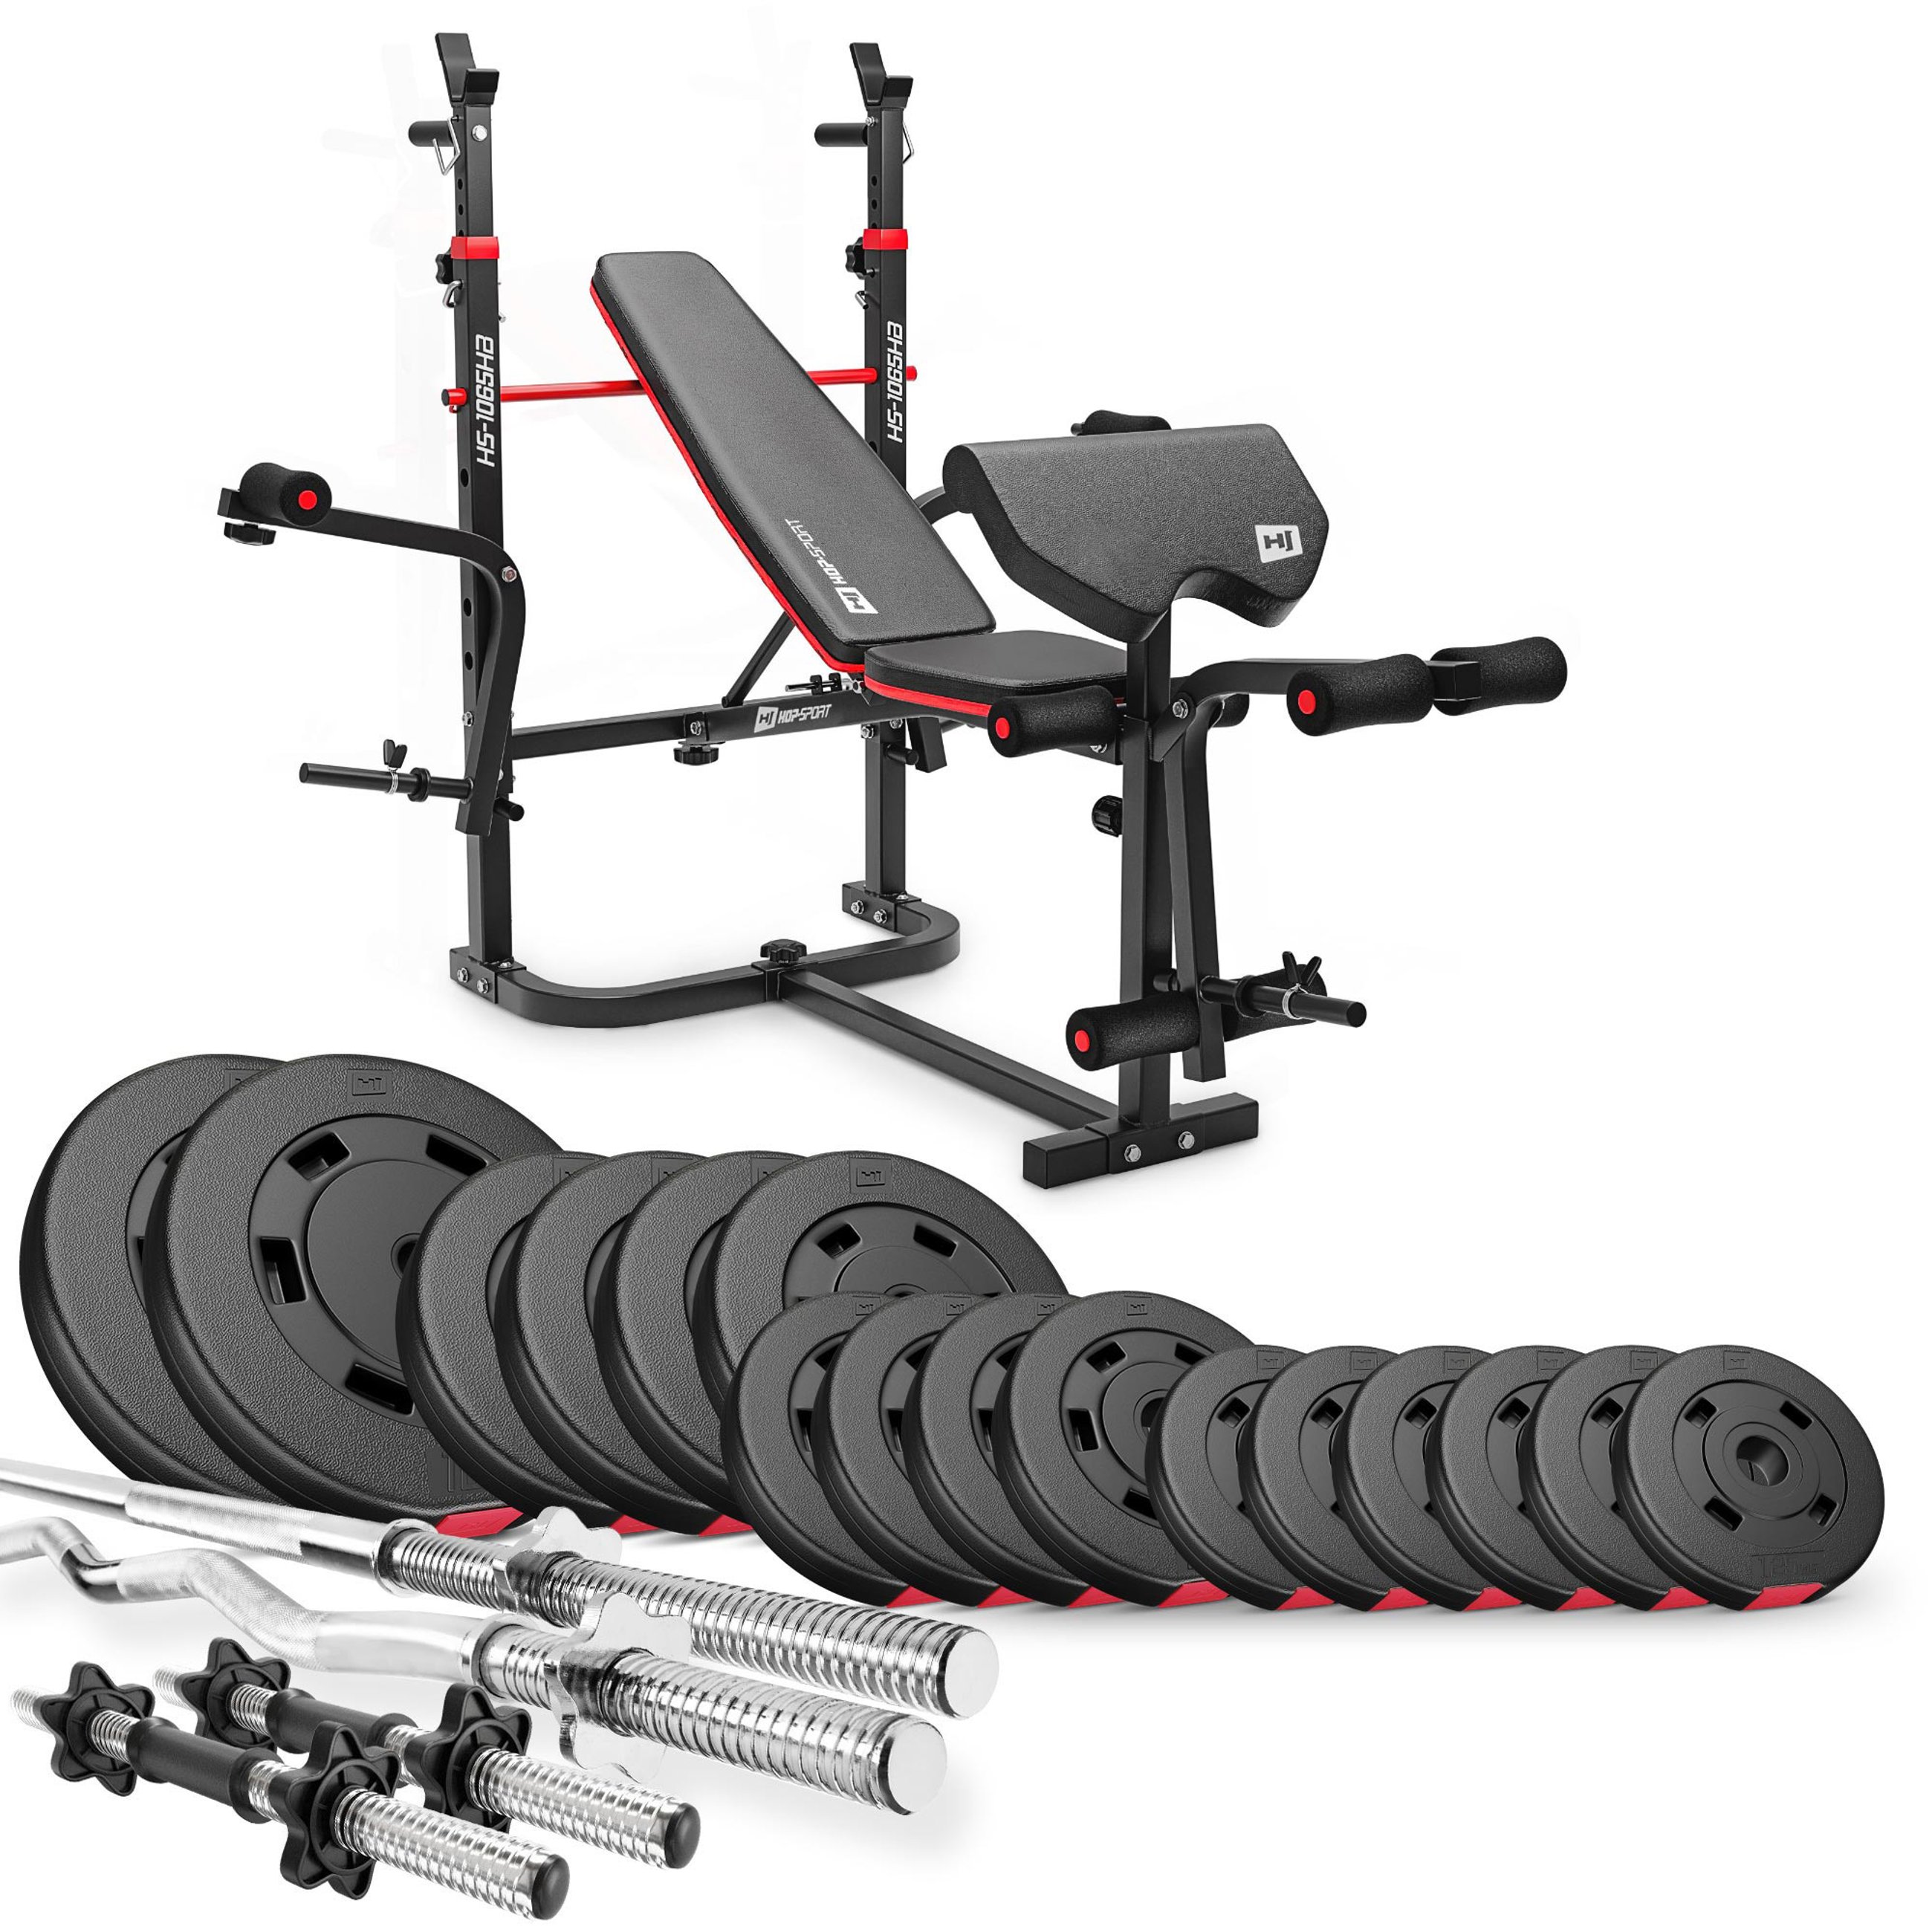 Premium 75 kg Barbell Set with HS-1065 Weight Bench